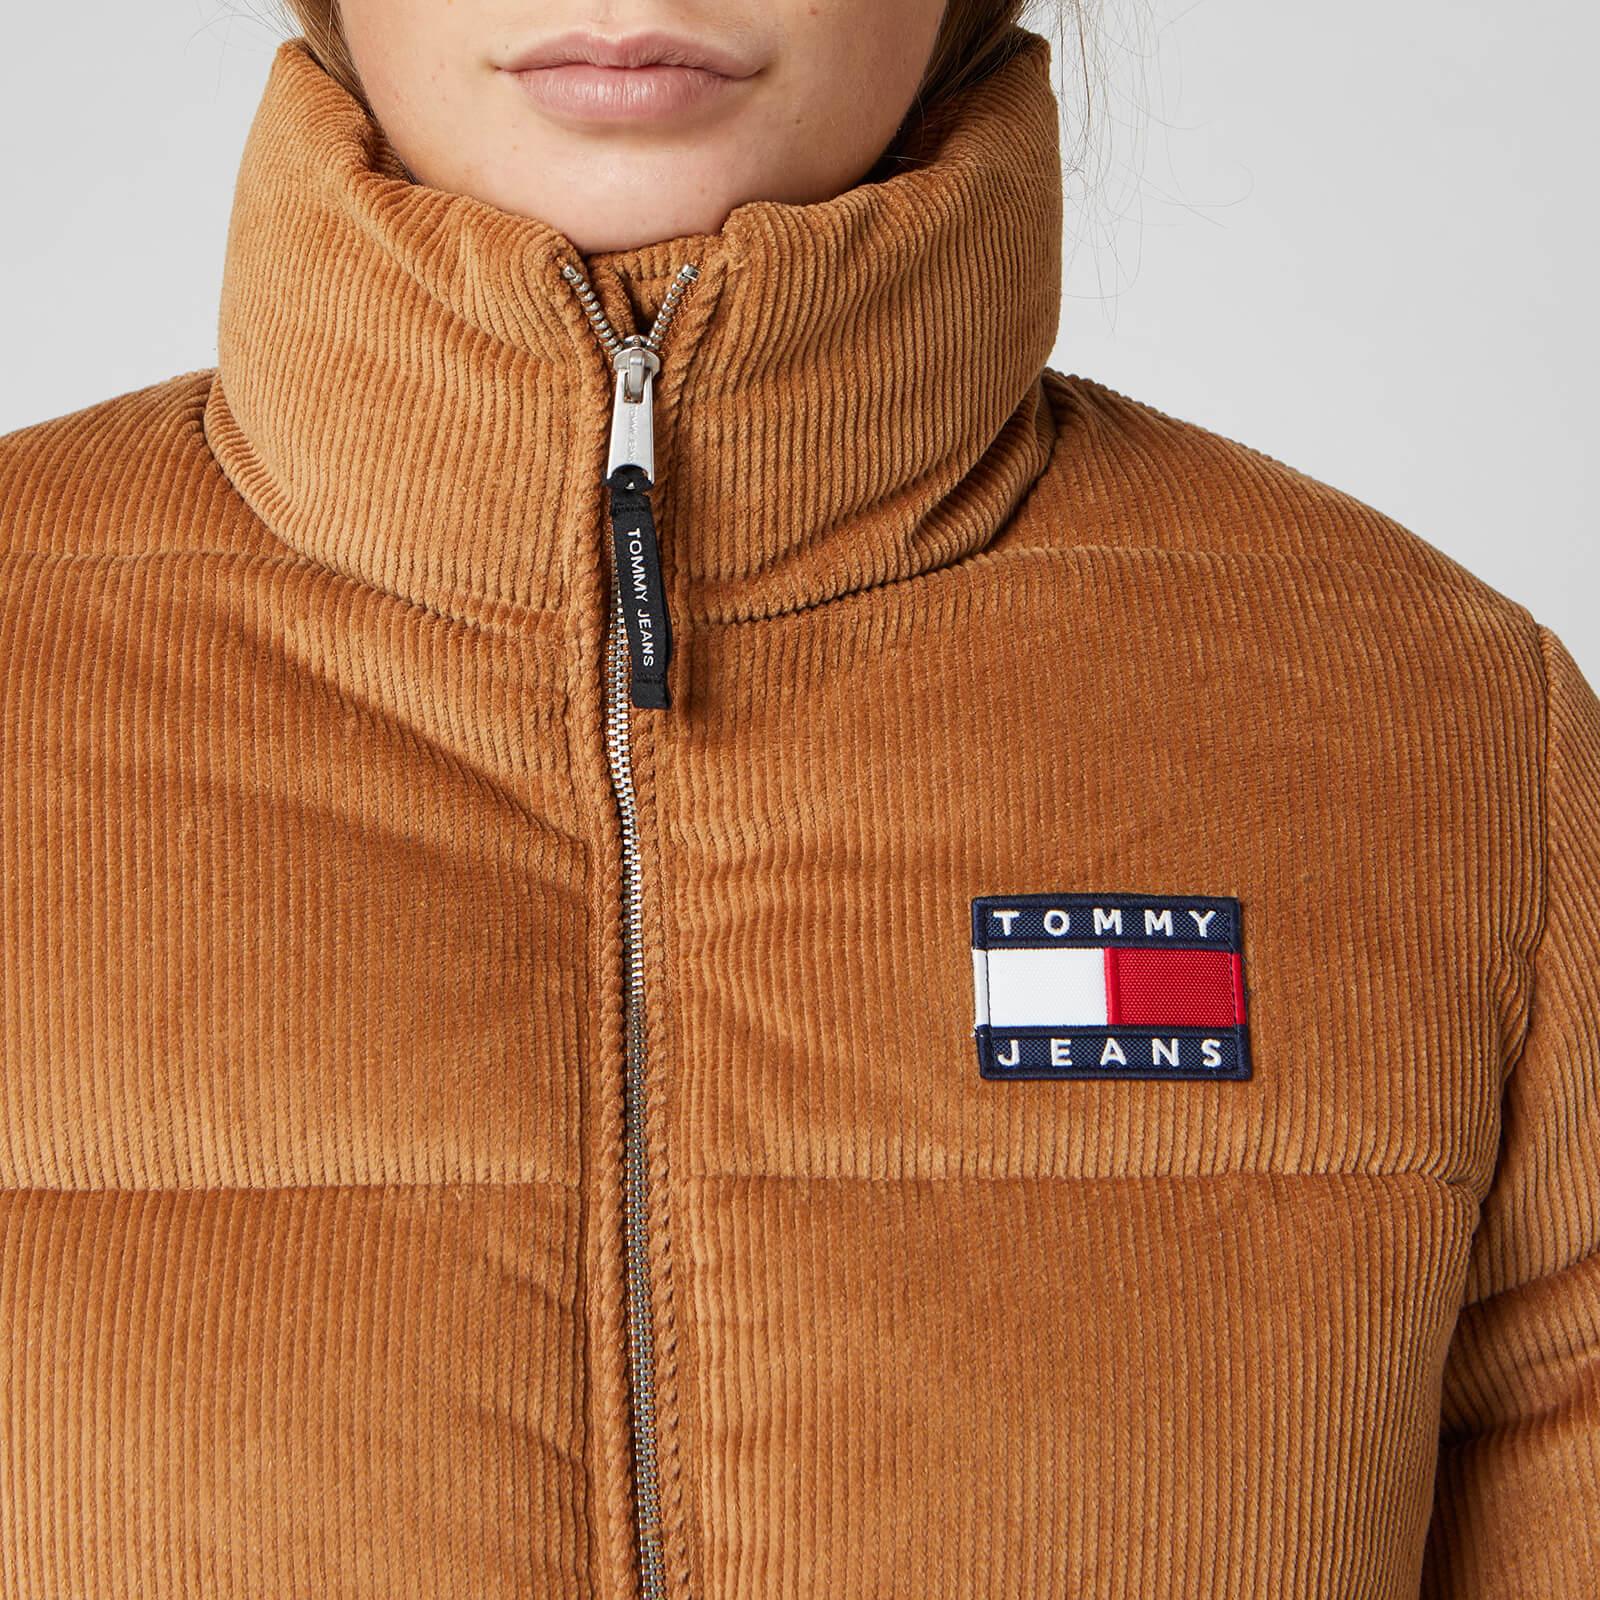 Tommy Hilfiger Cord Jacket Clearance, SAVE 35% - www.colexio-karbo.com